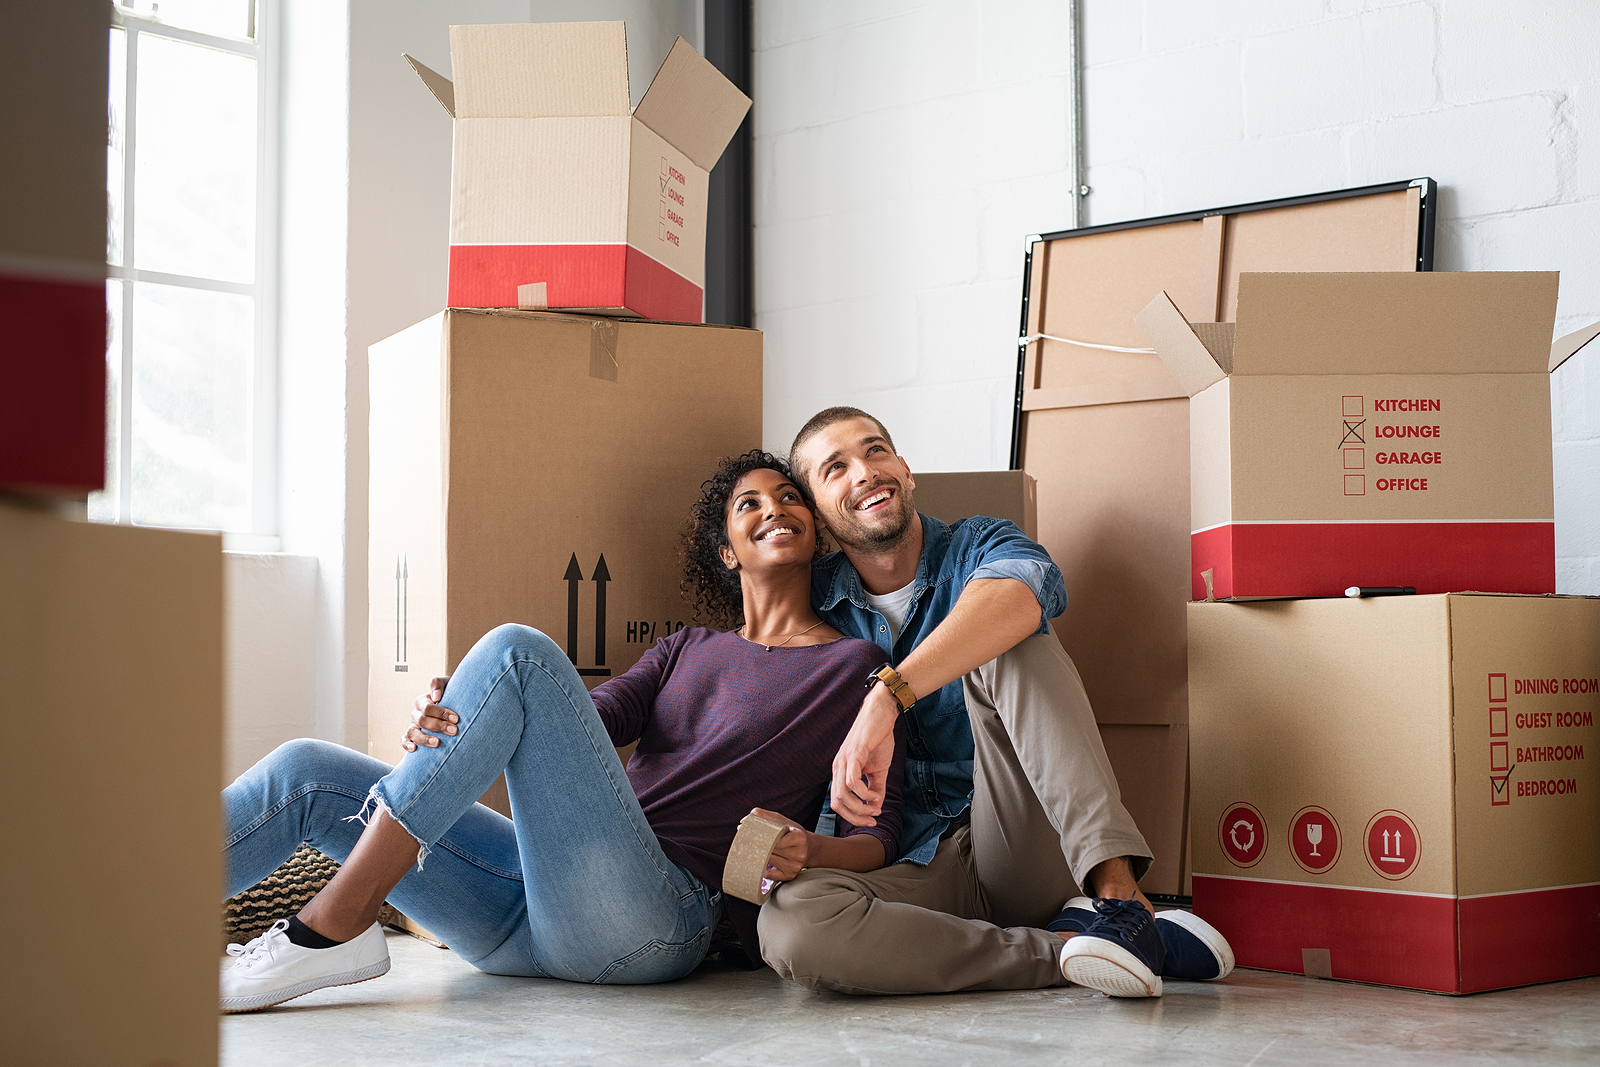 3 Important Questions Every Homebuyer Should Ask, But Few Do